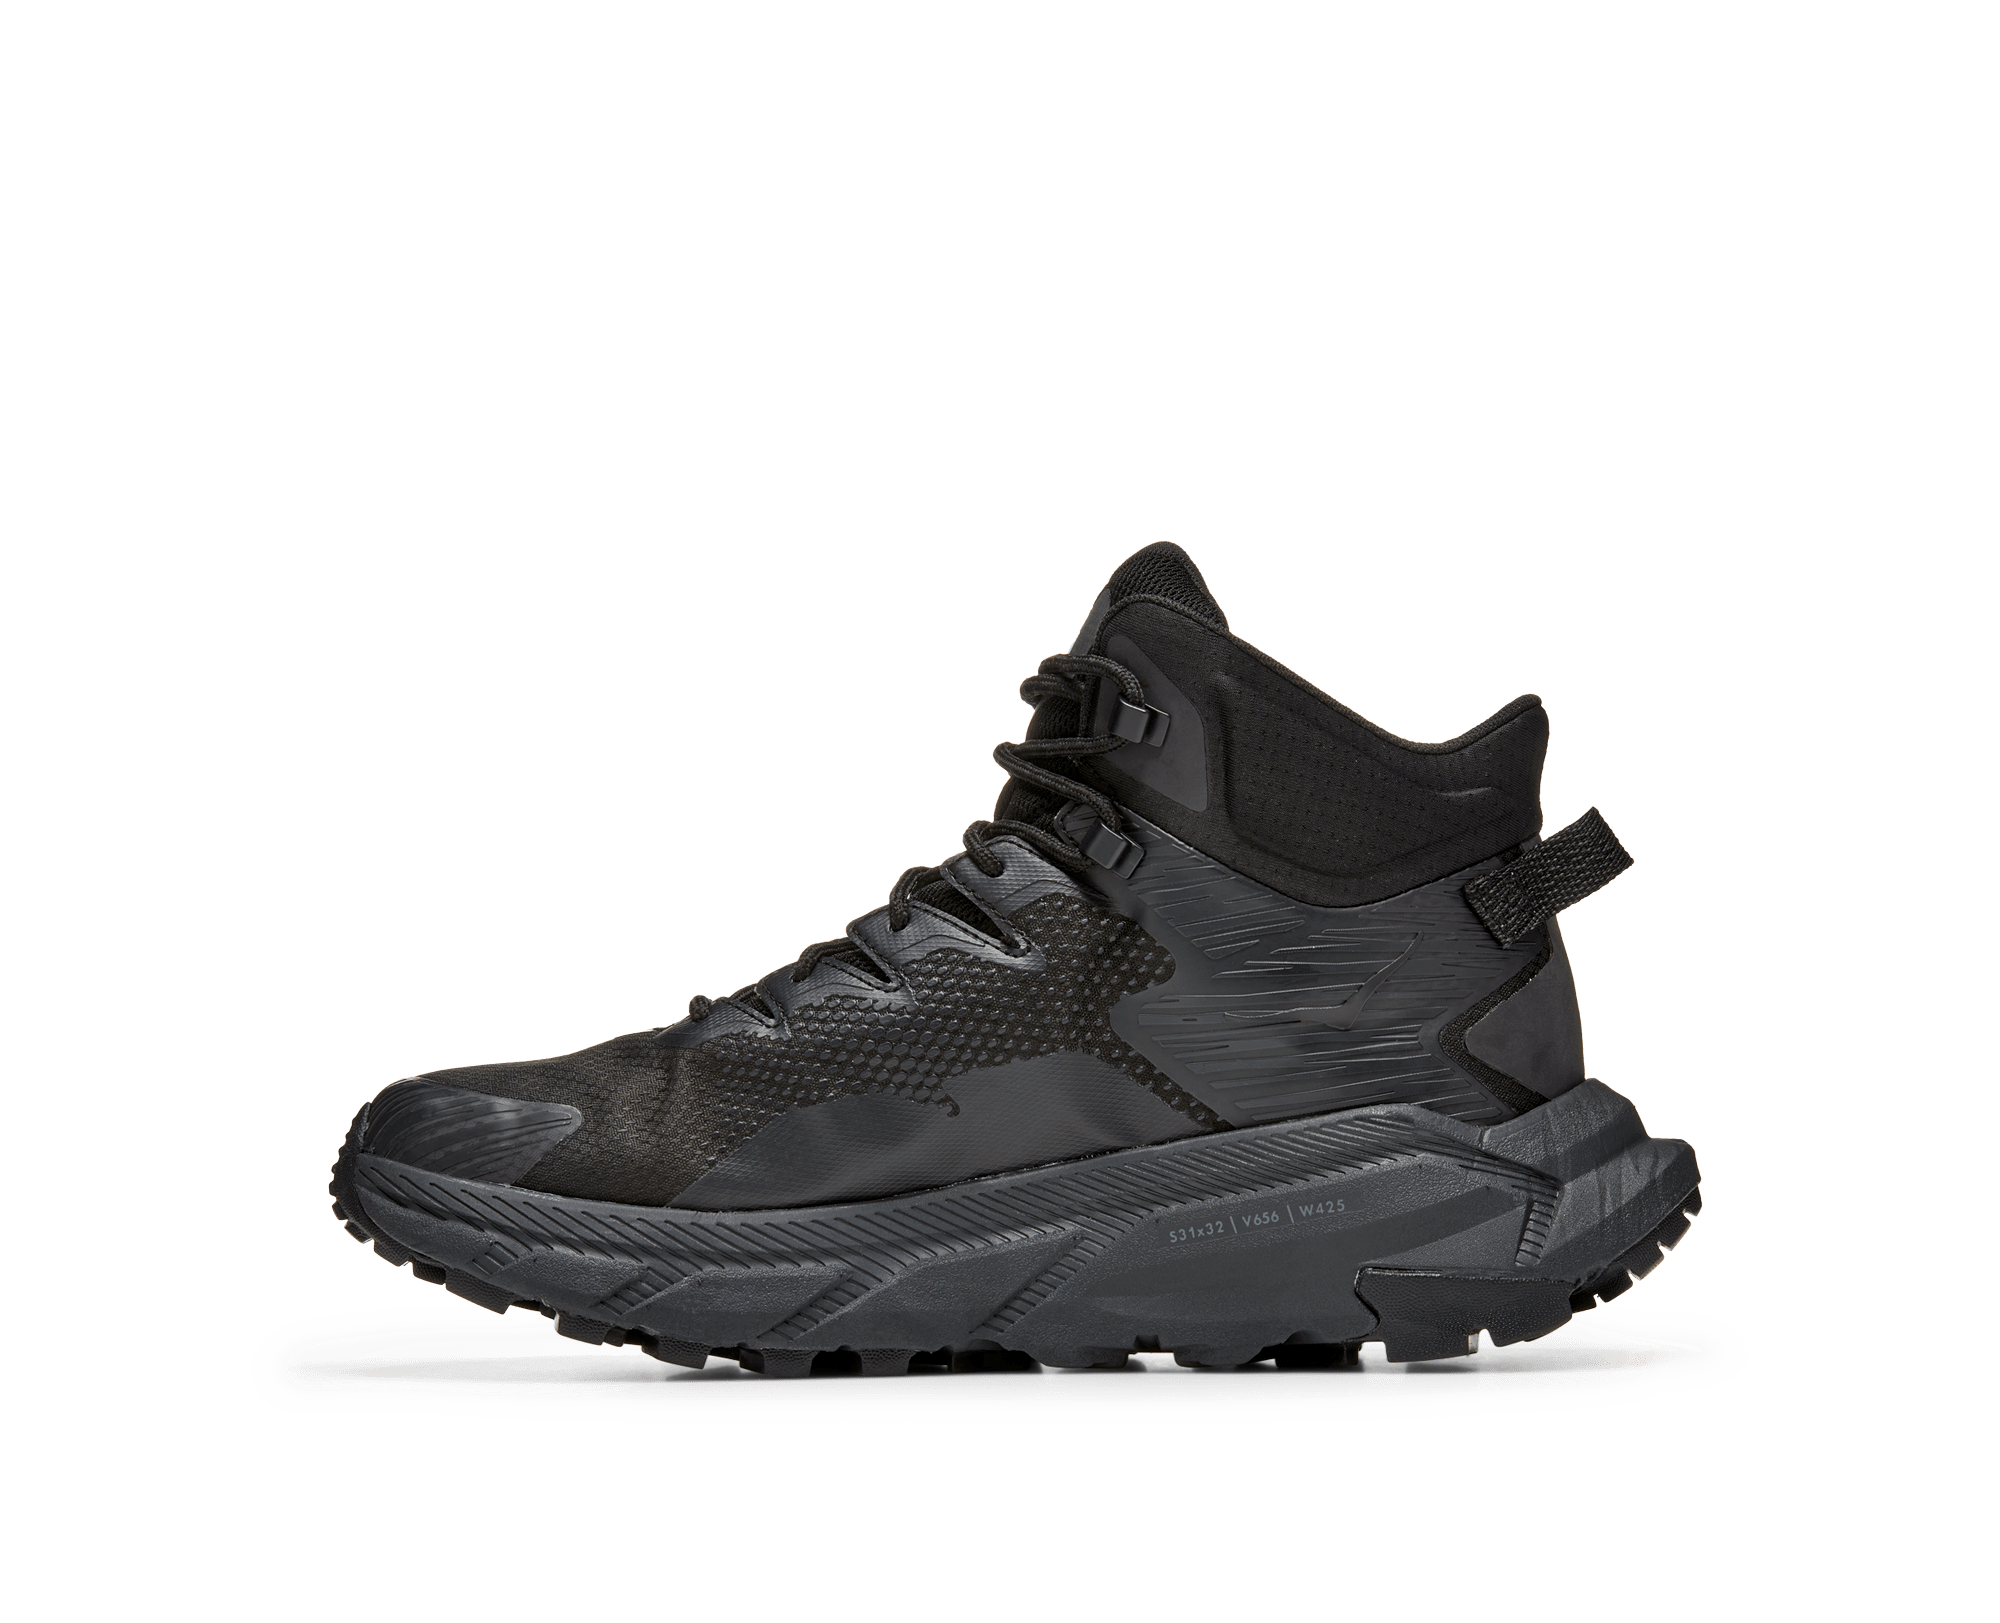 Medial view of the Men's Trail Code GTX shoe by HOKA in Black/Raven